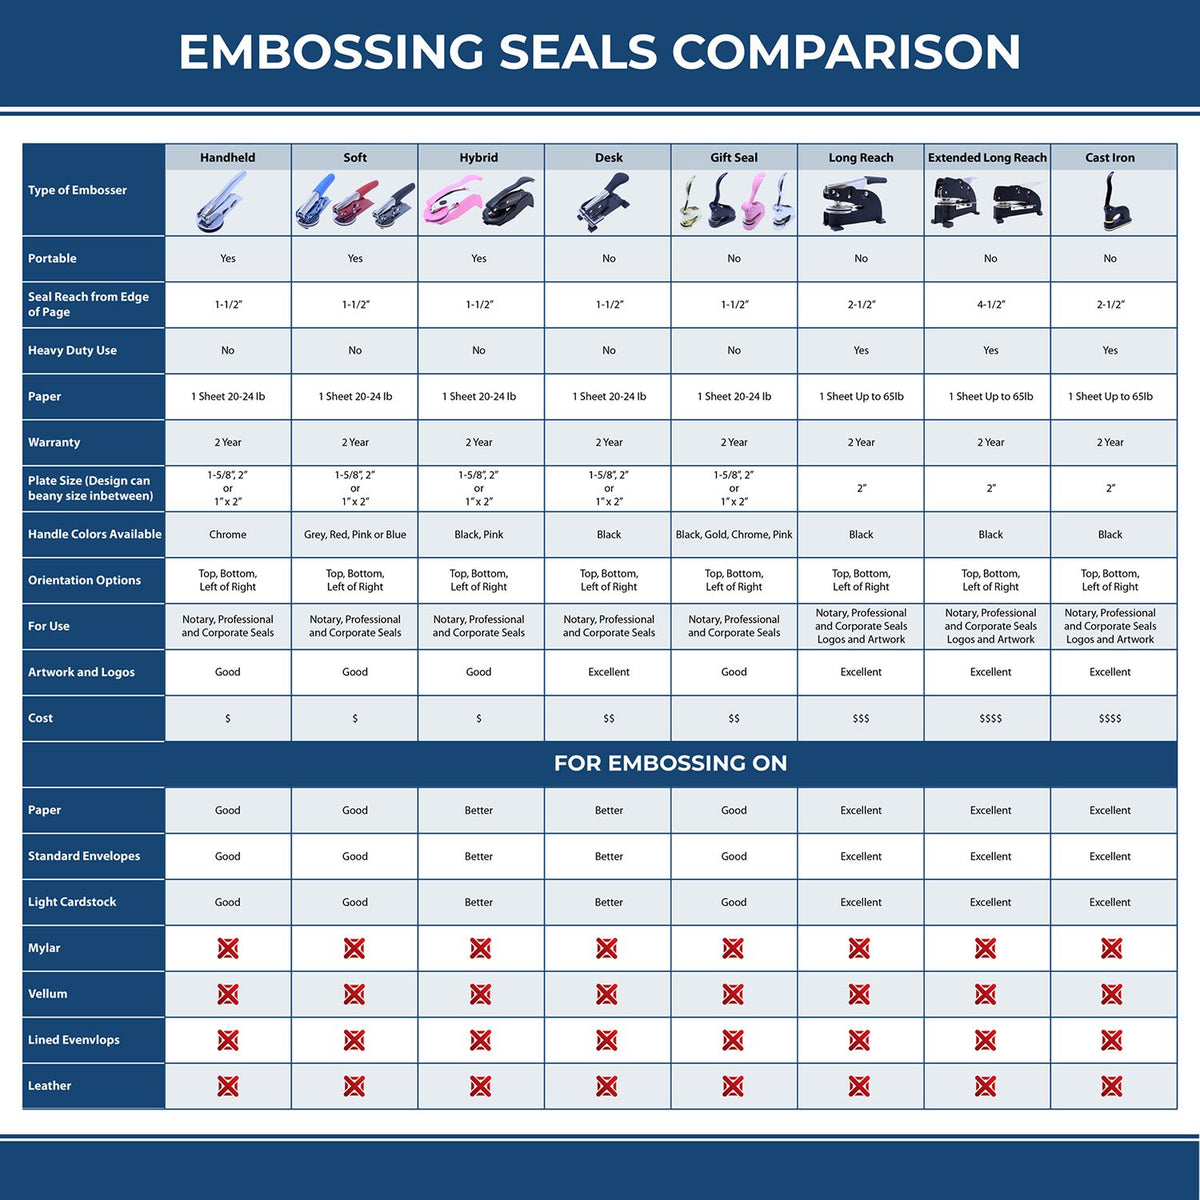 A comparison chart for the different types of mount models available for the Hybrid Tennessee Geologist Seal